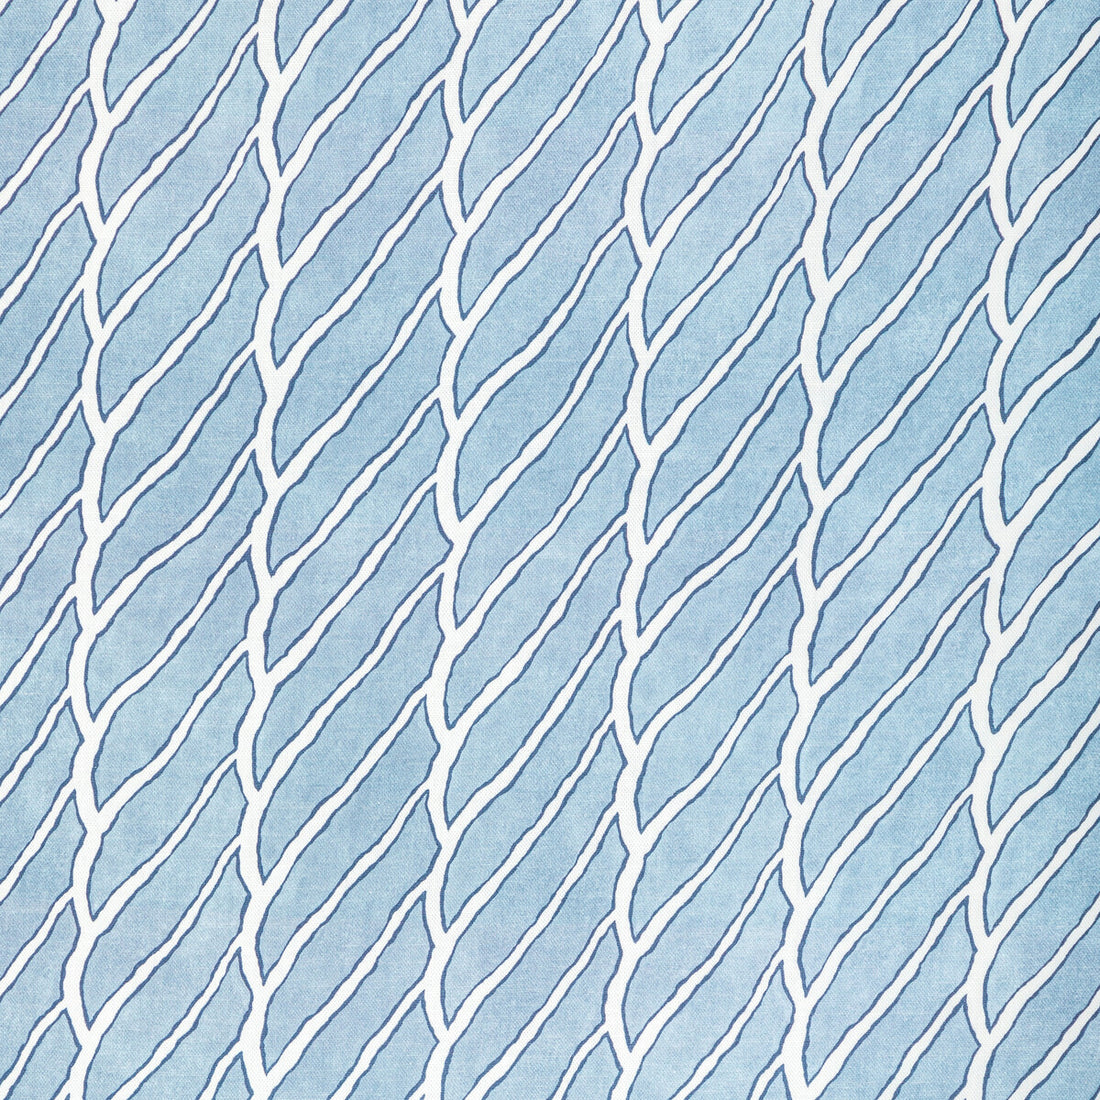 Sea Cable fabric in ocean color - pattern SEA CABLE.5.0 - by Kravet Basics in the Jeffrey Alan Marks Seascapes collection